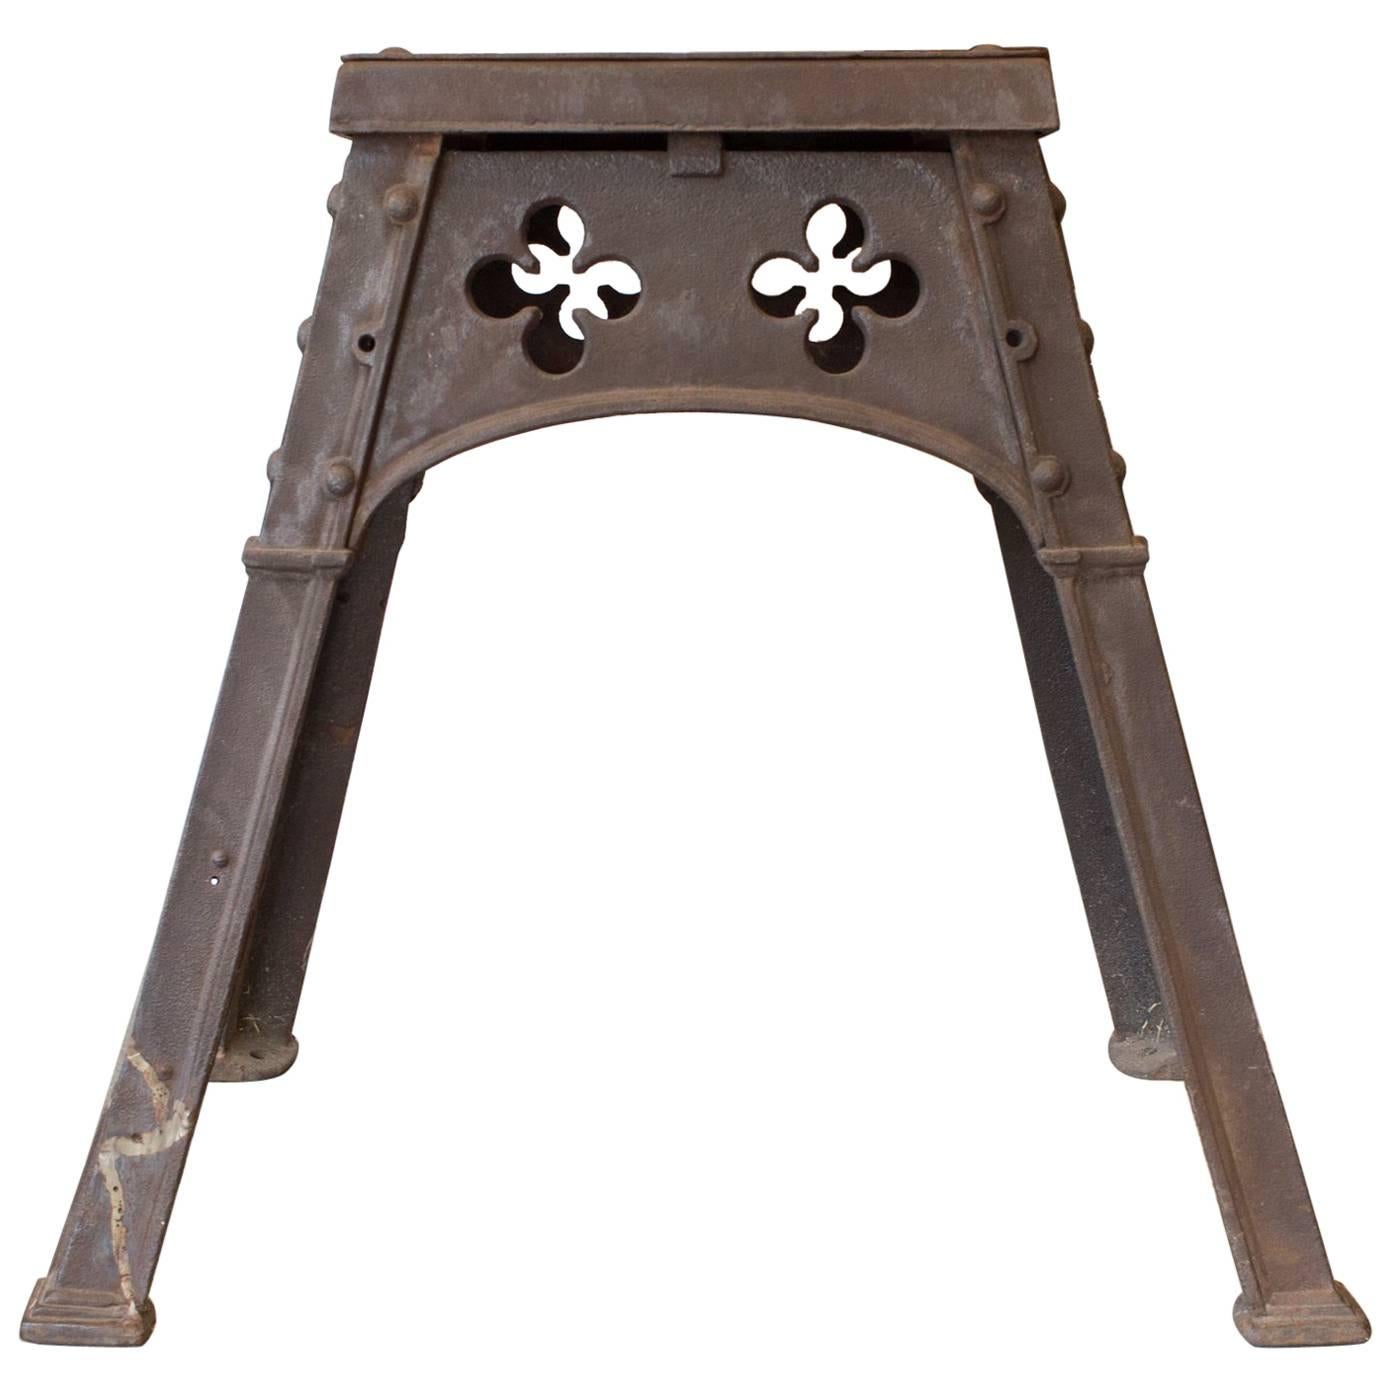 Antique French Gothic Iron Table from the Late 19th Century